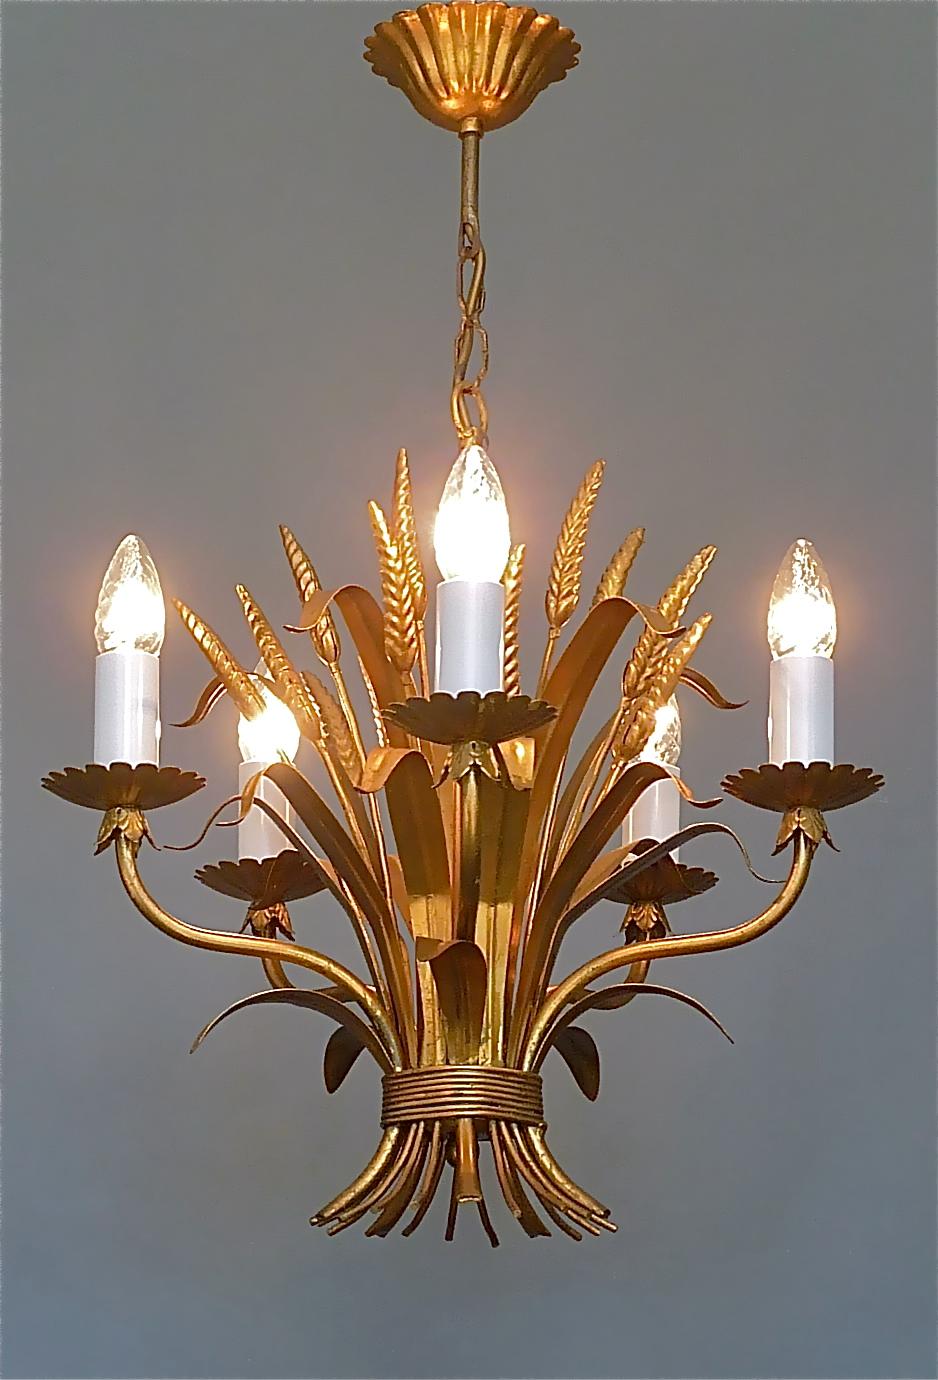 Gilt Italian Floral Sheaf of Wheat Five-Light Chandelier Coco Chanel Style, Kögl For Sale 9